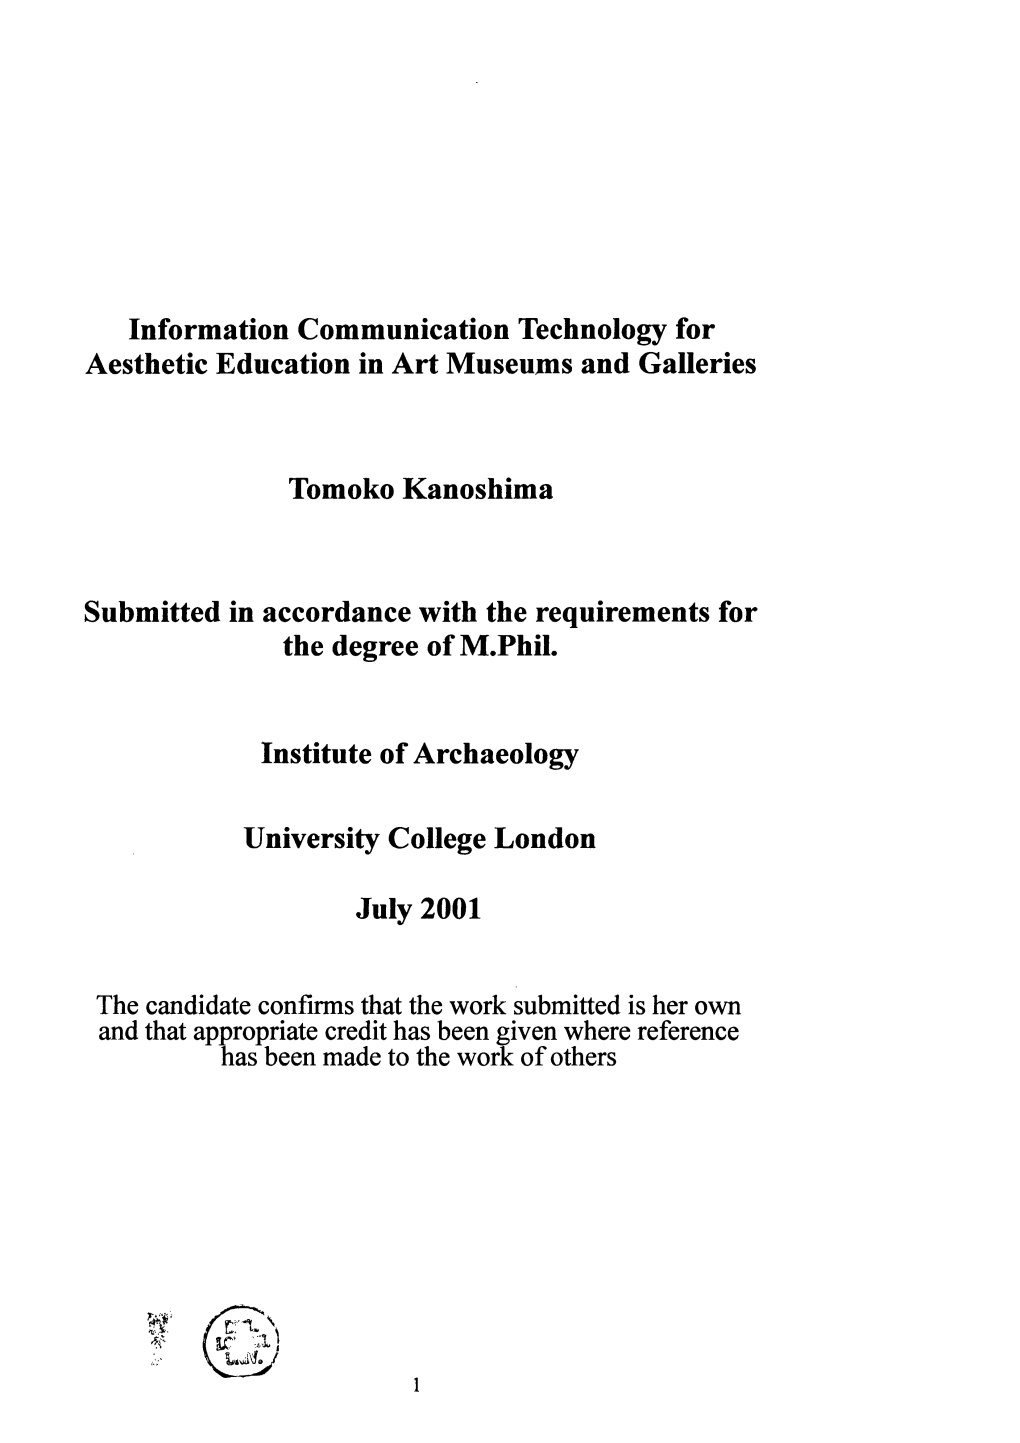 Information Communication Technology for Aesthetic Education in Art Muséums and Galleries